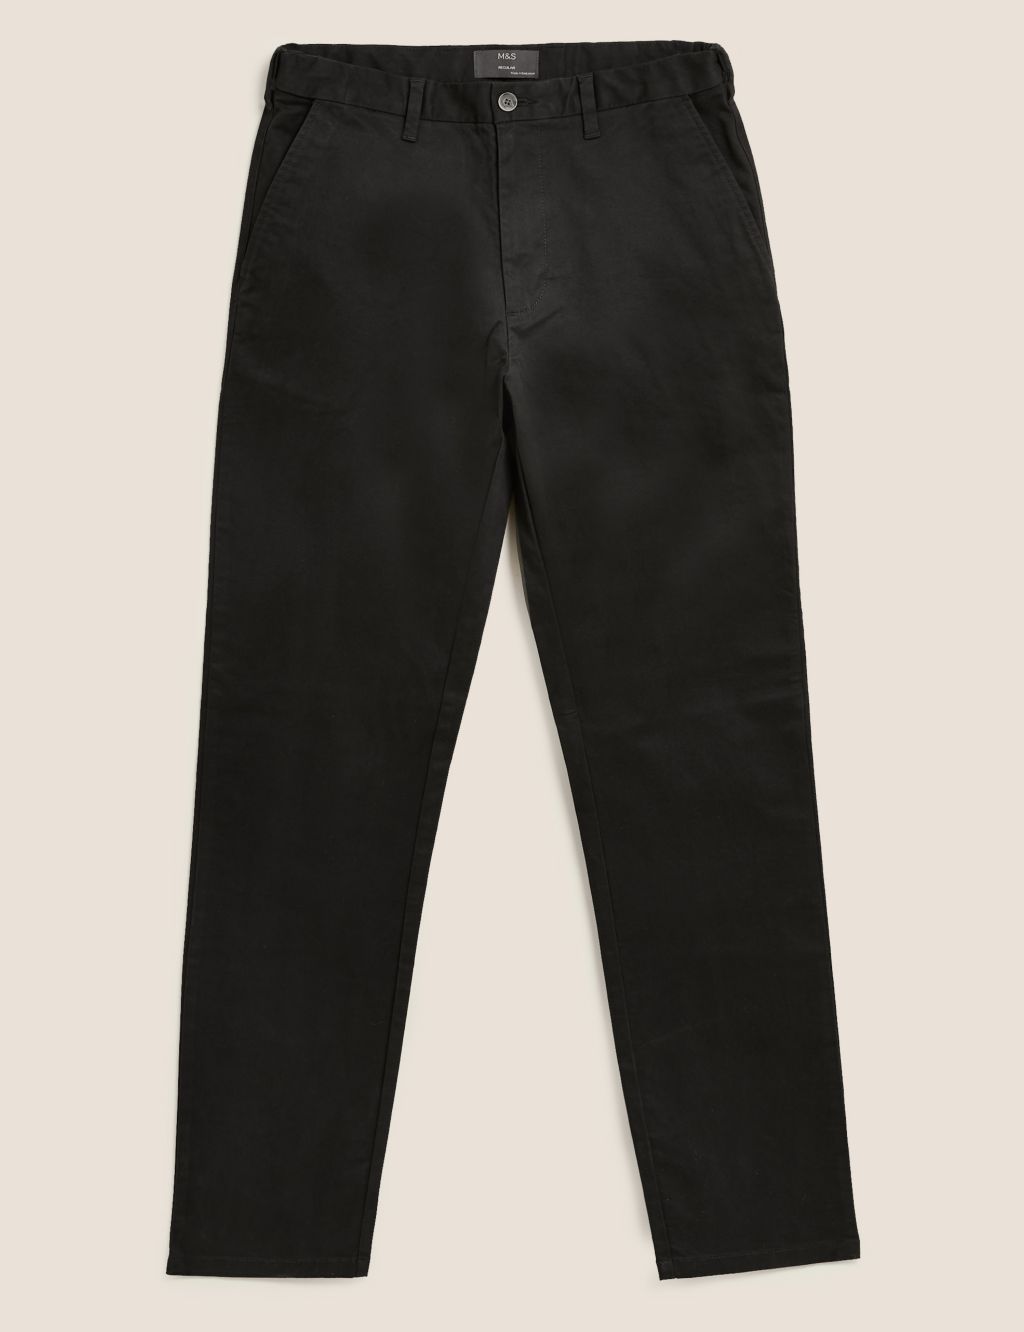 Big & Tall Regular Fit Stretch Chinos | M&S Collection | M&S